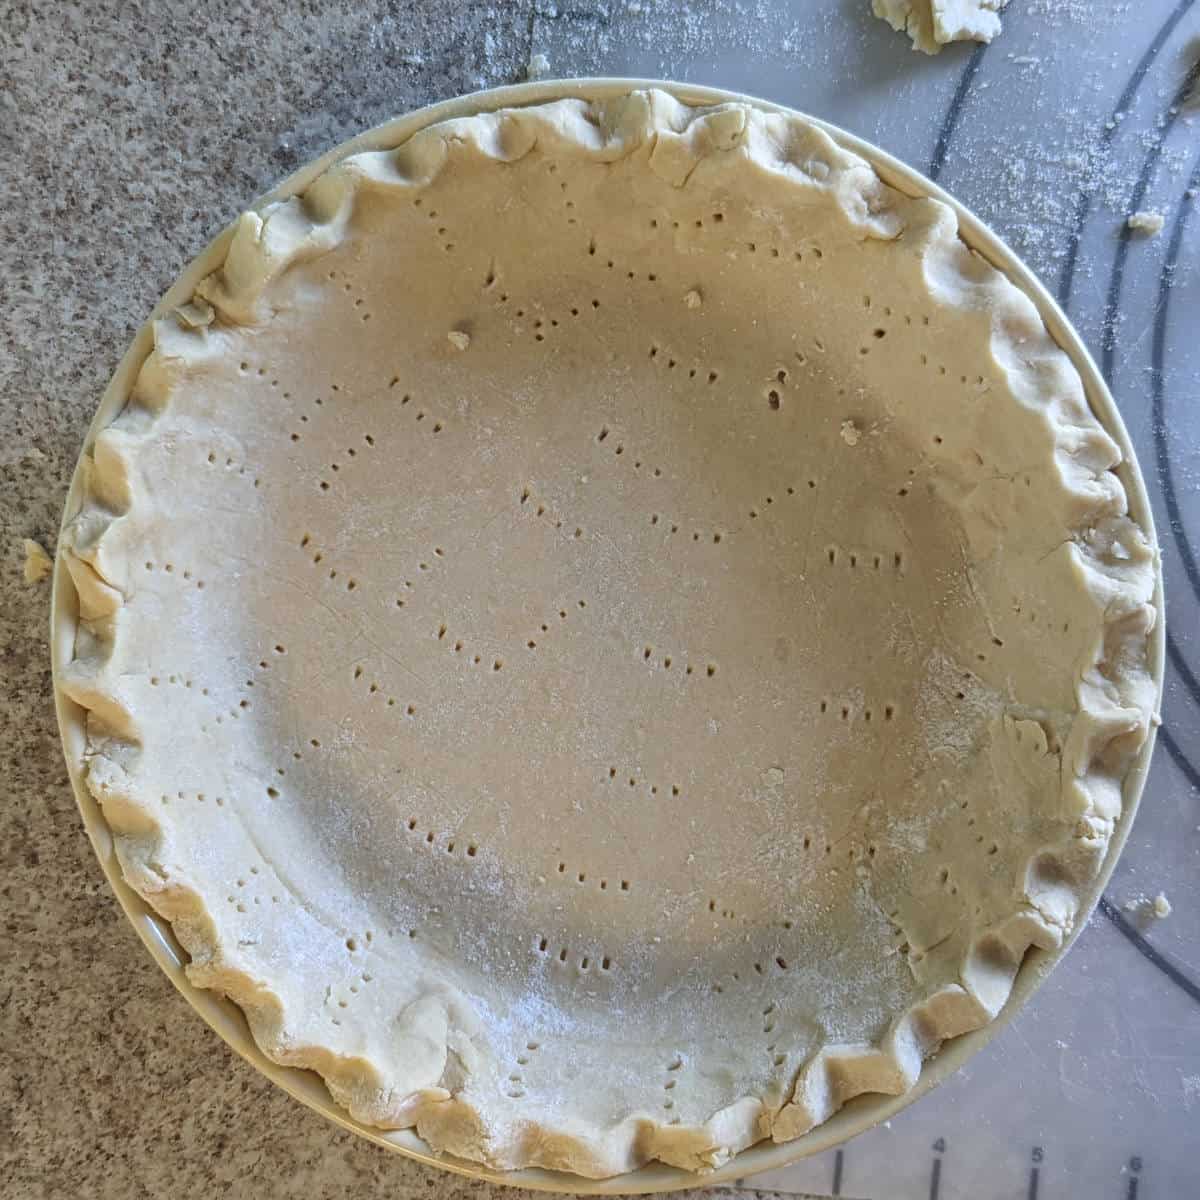 pie crust dough, crimped and pricked in a pie dish